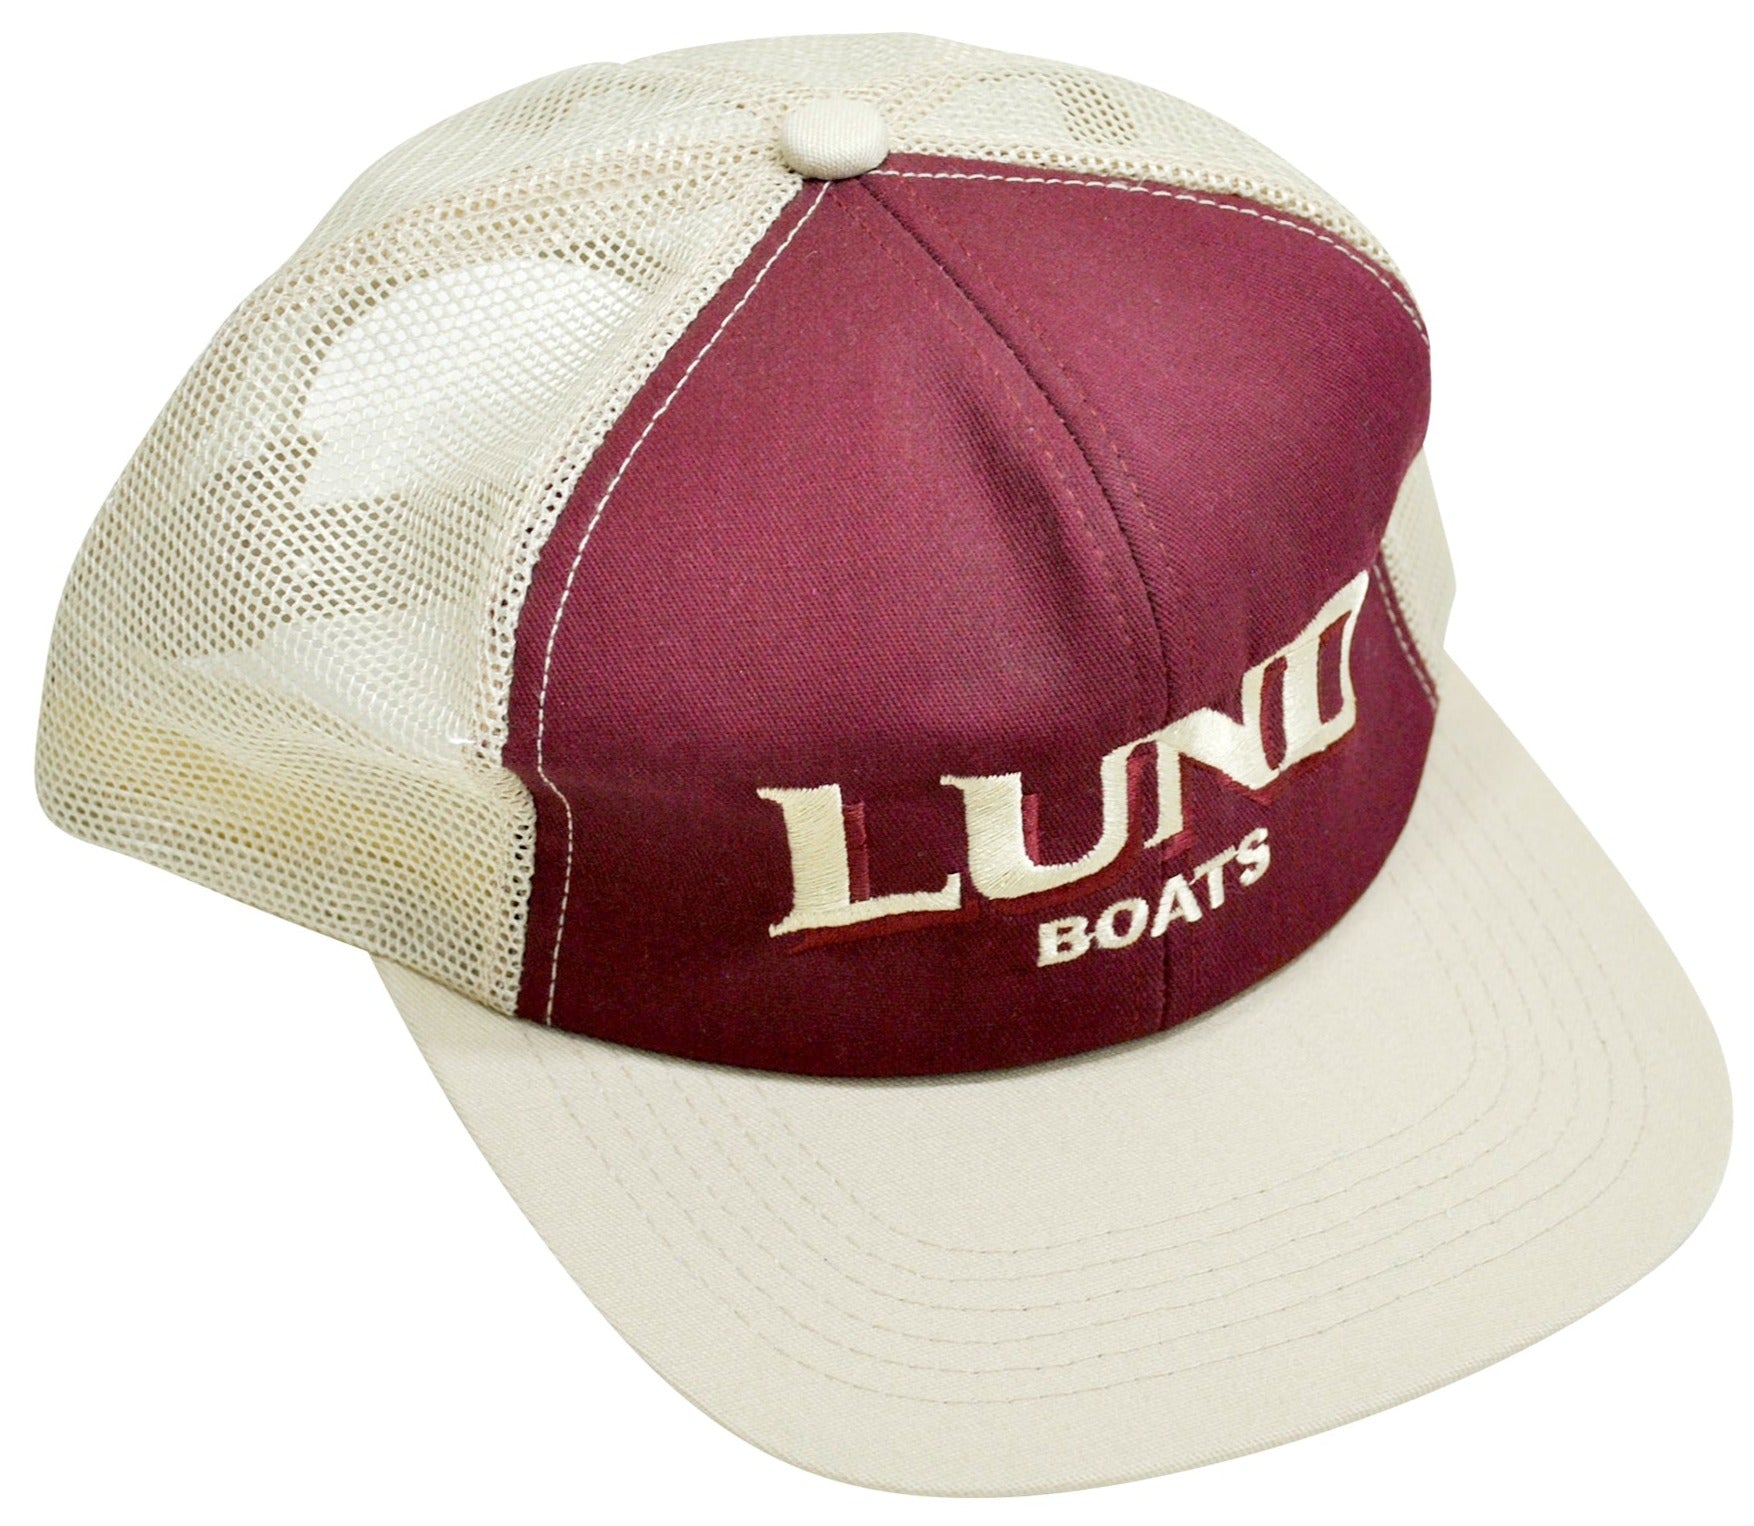 Lund Boats Mens Hat Strap Back Baseball Cap The Ultimate Fishing Experience